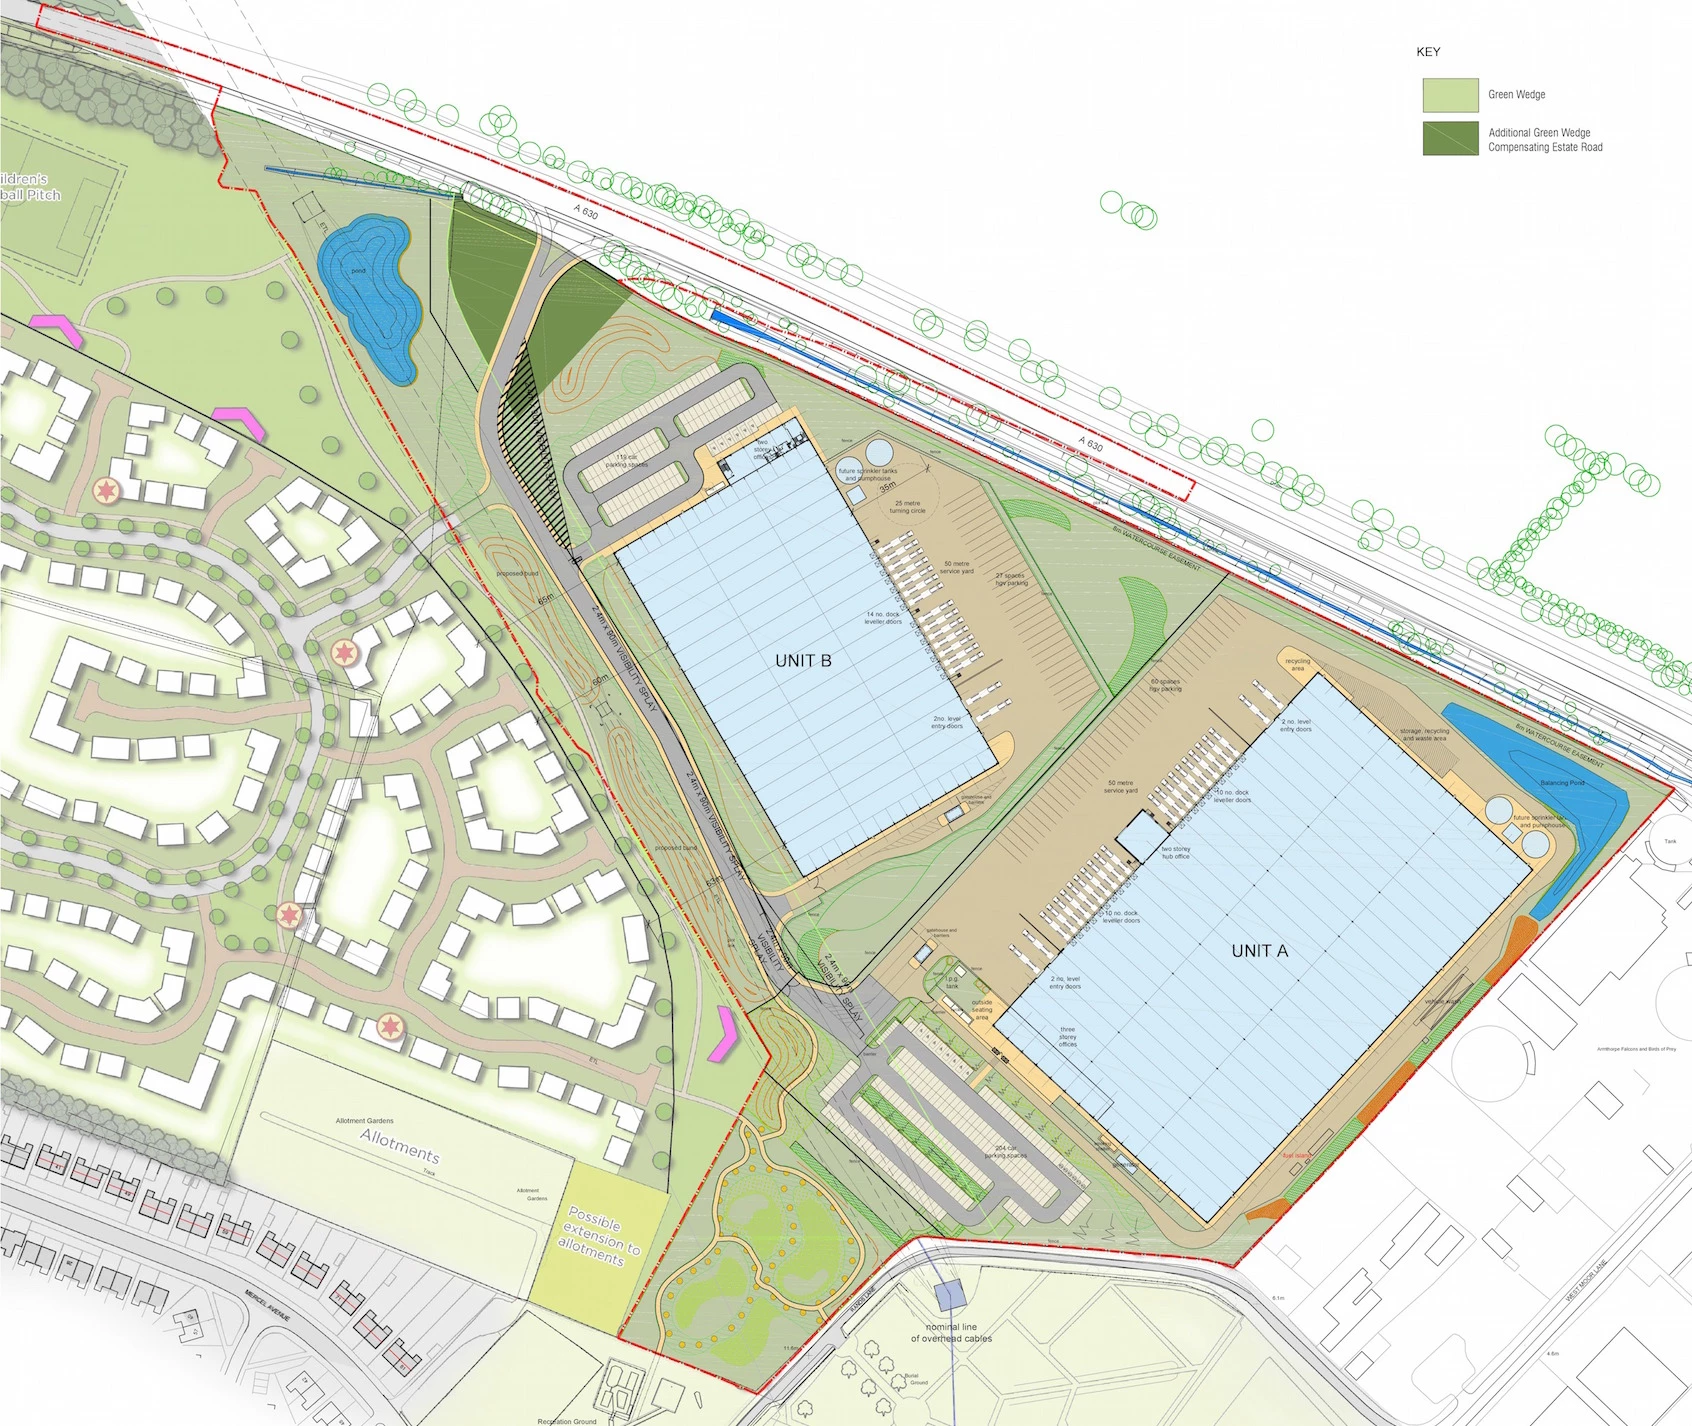  £35 million industrial scheme in Doncaster, South Yorkshire.